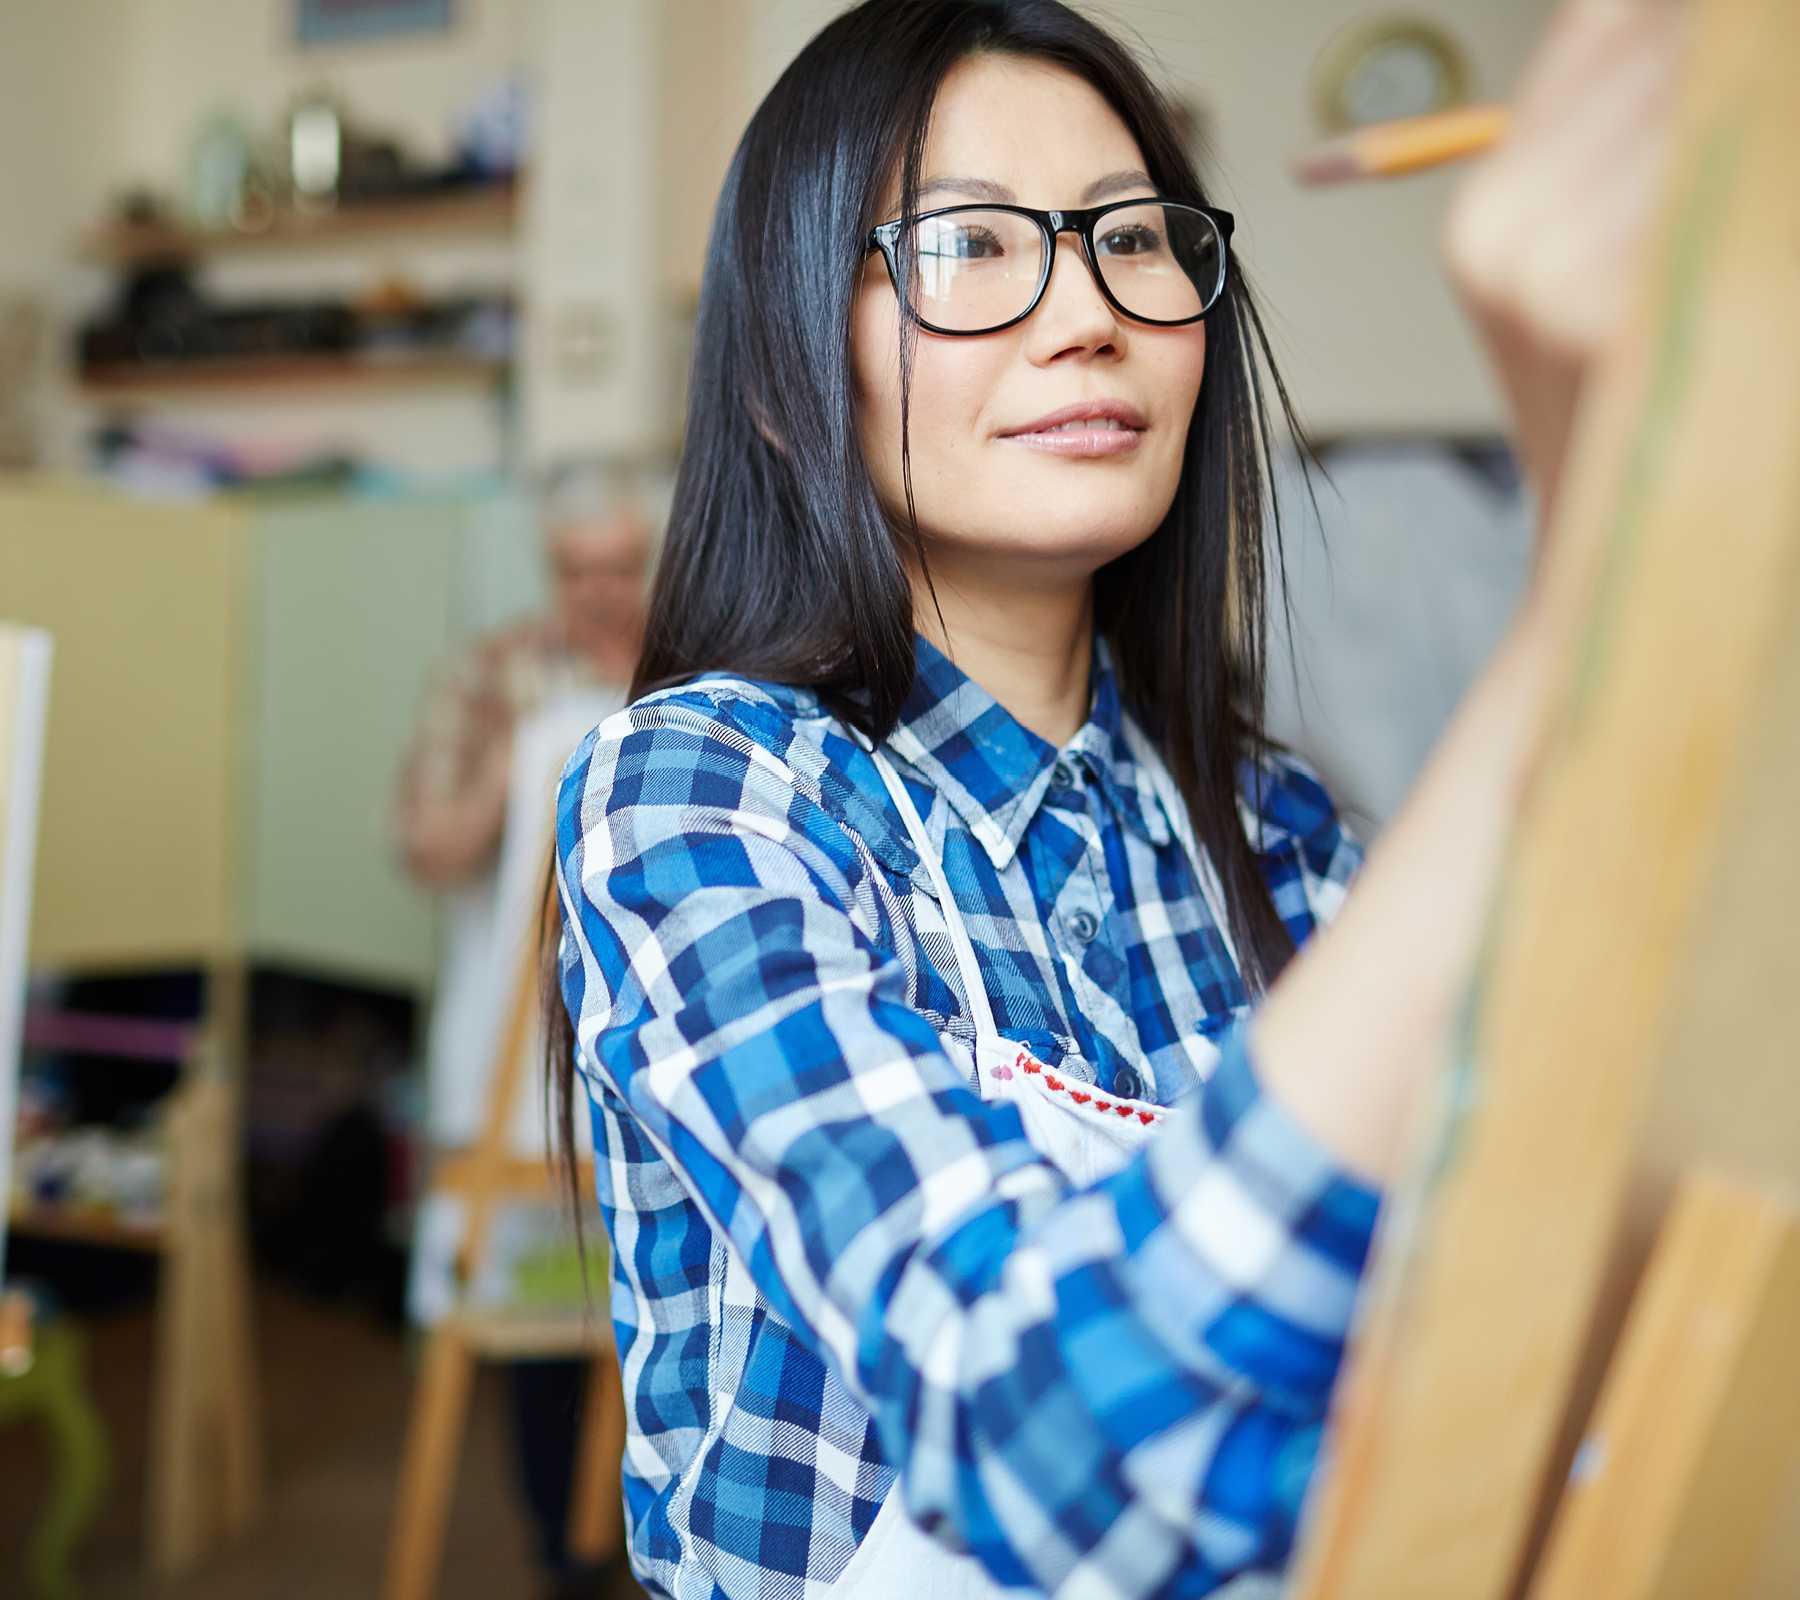 A young woman in a blue checkered shirt holds her hand up to an easel with a brush